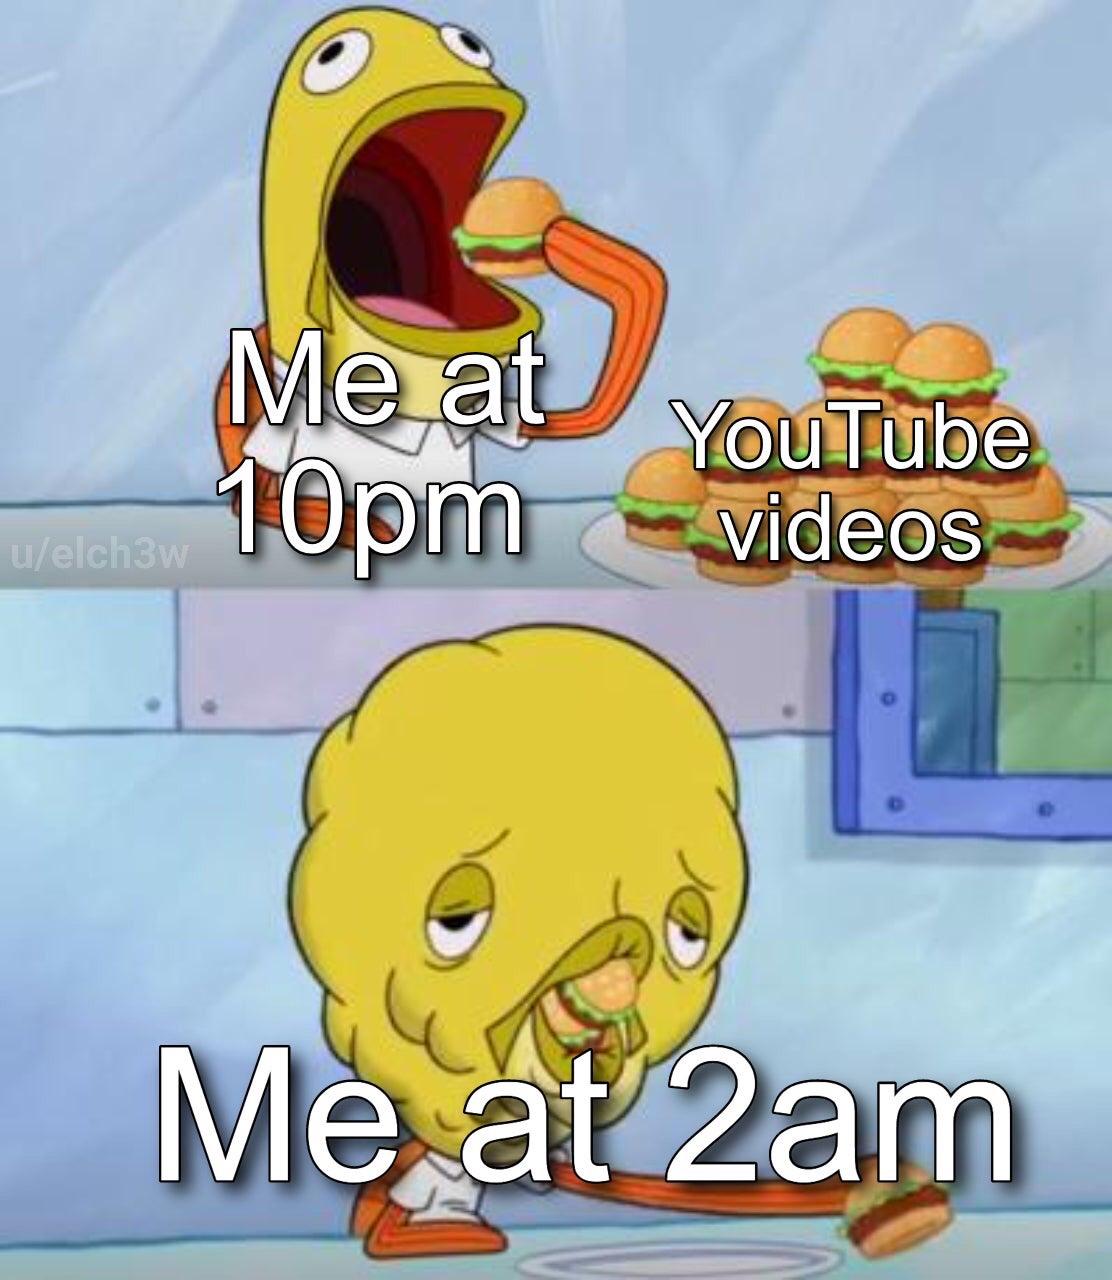 cartoon - Me at 10pm You Tube videos welch3w Me at 2am